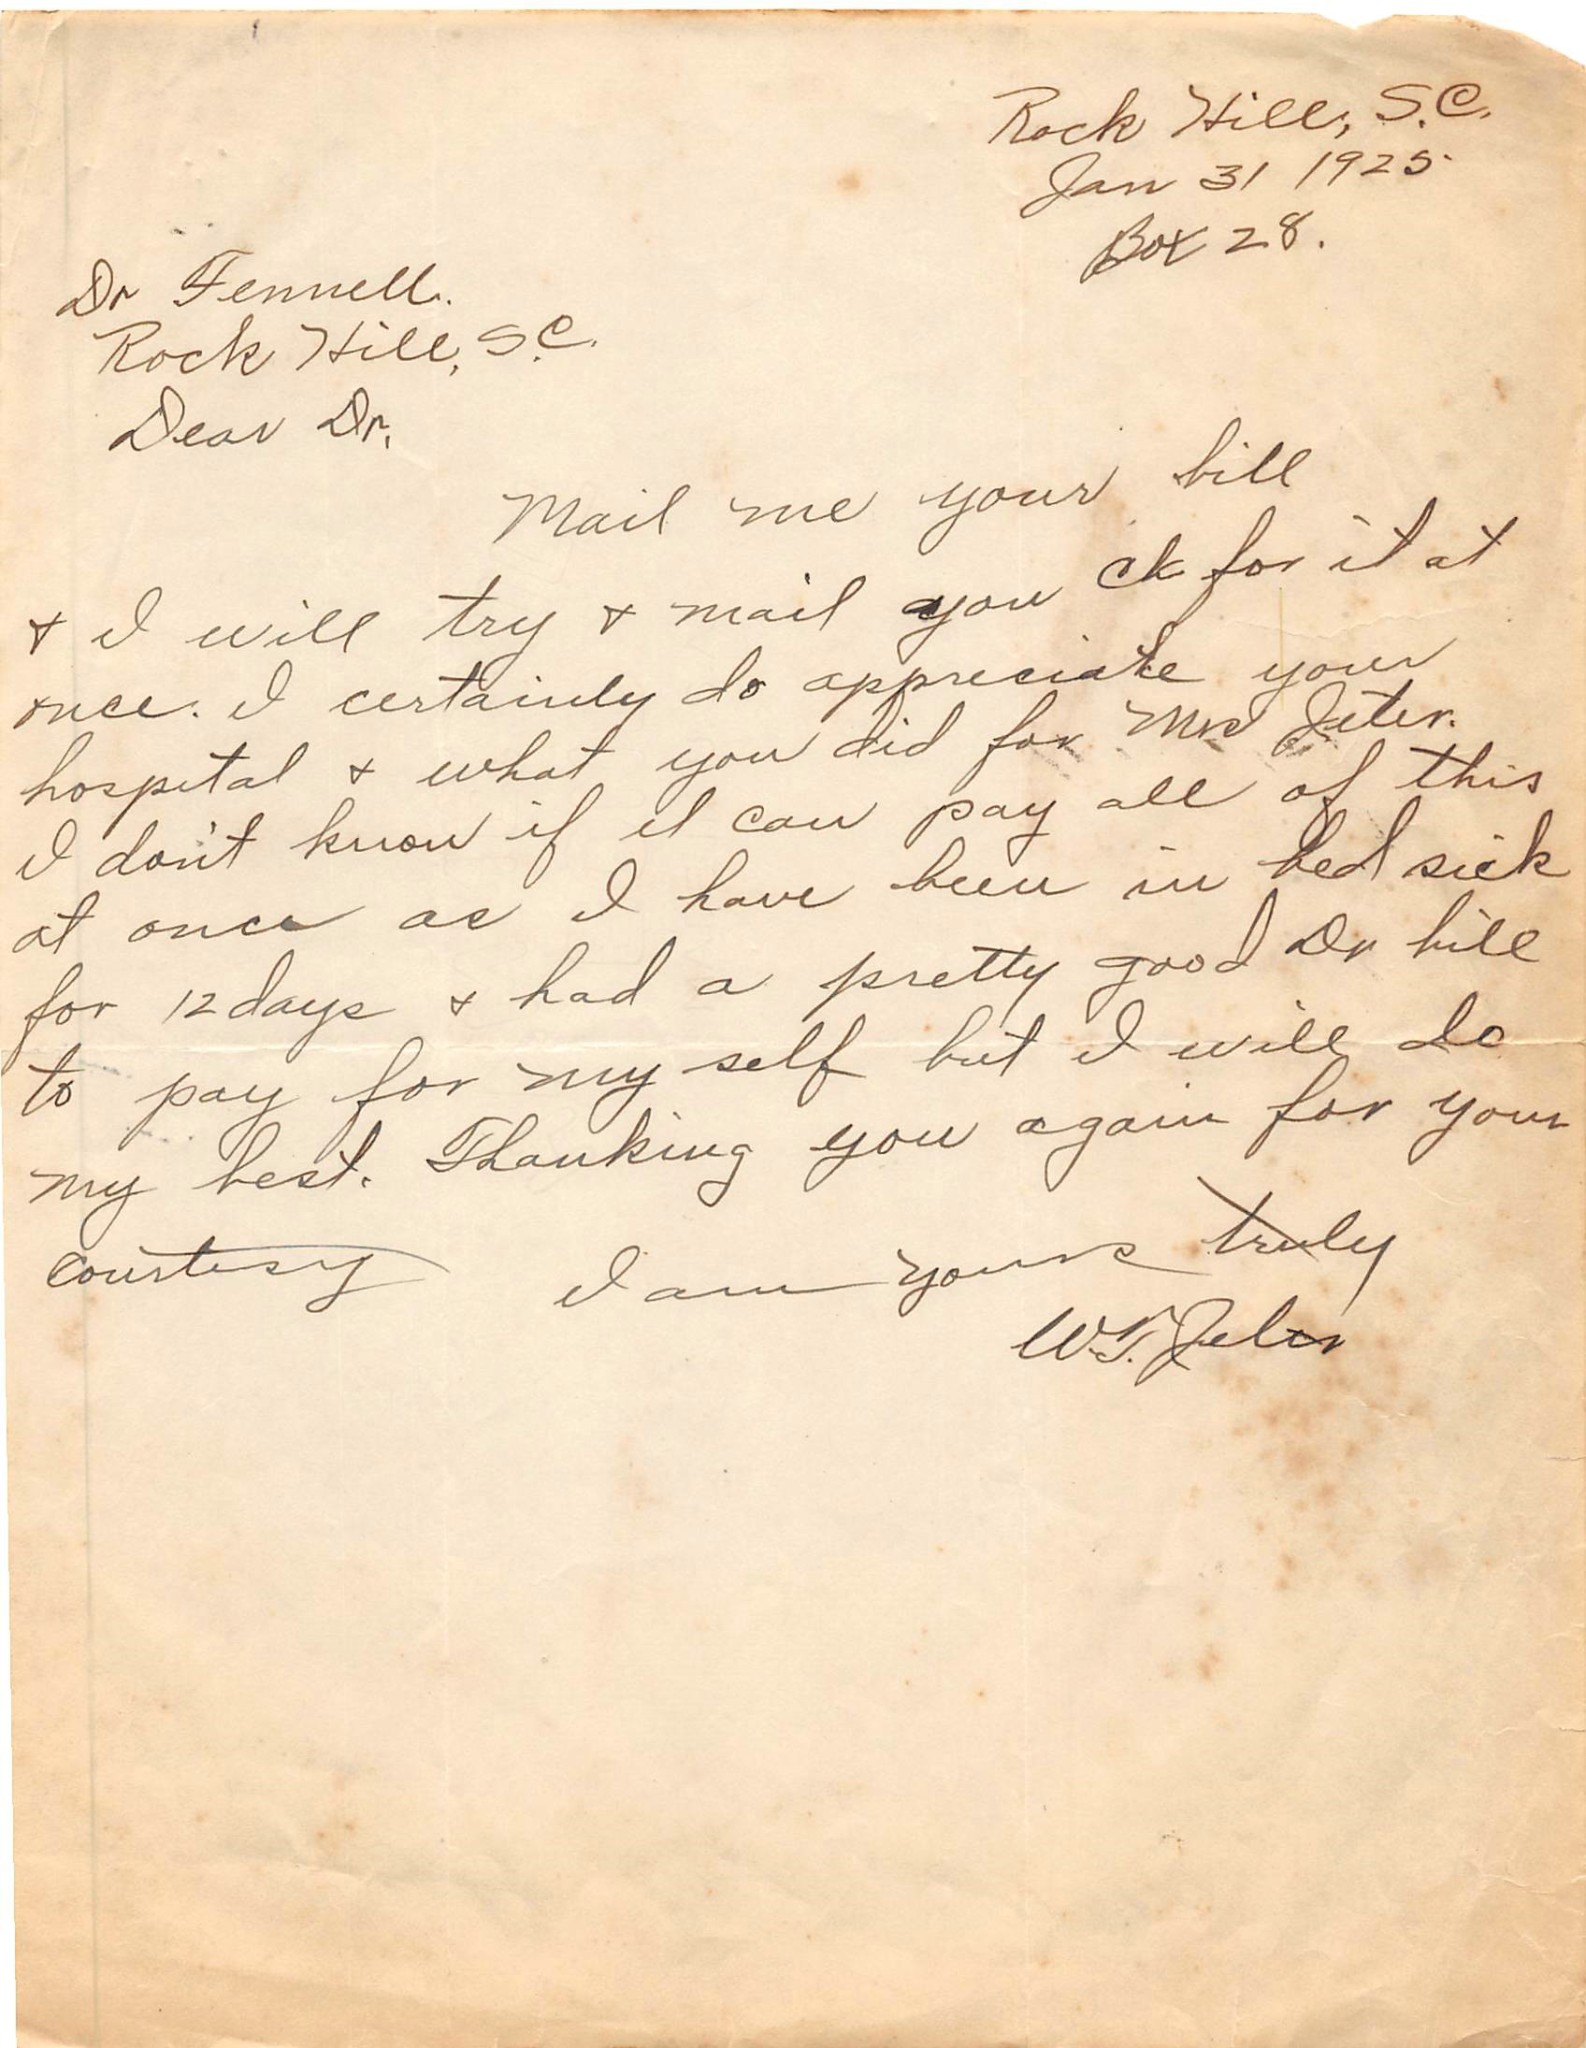 LETTER FROM W.F. JETER - 1925